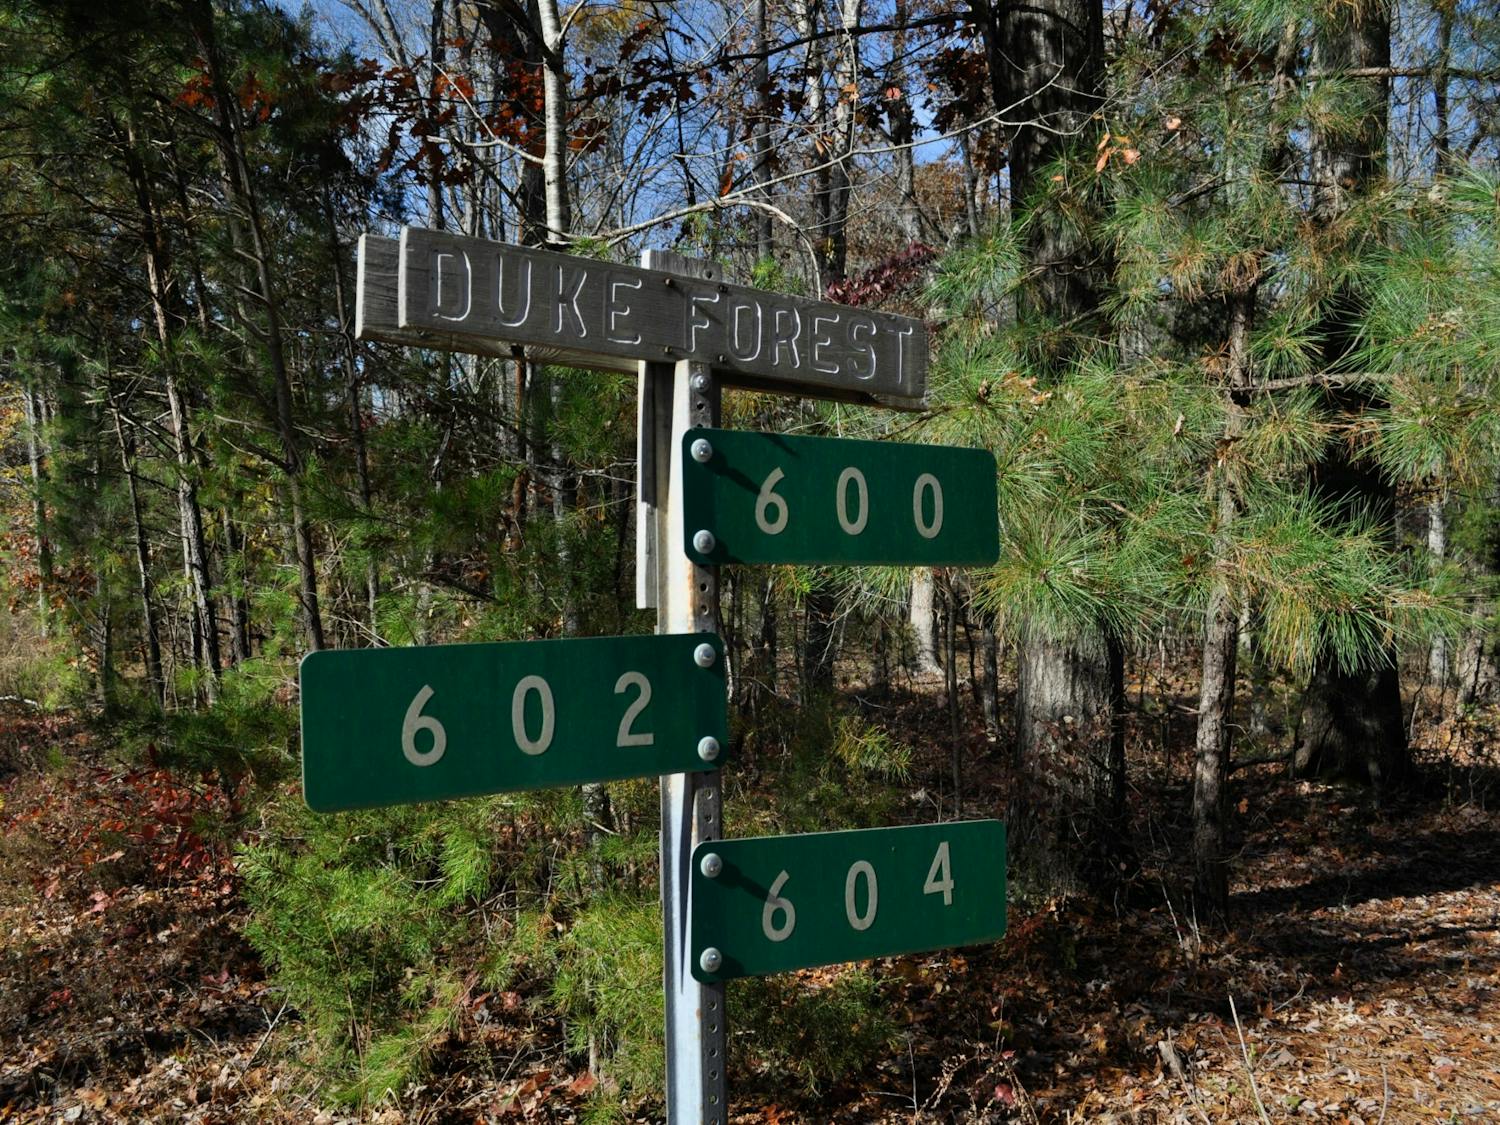 A sign marks the beginning of Duke Forest located along Eubanks Road on Sunday, Nov. 24, 2019. Plans of developing land near the corner of Eubanks Road and Old NC 86 raised concerns from residents about how Duke Forest's research and natural sites would be affected.